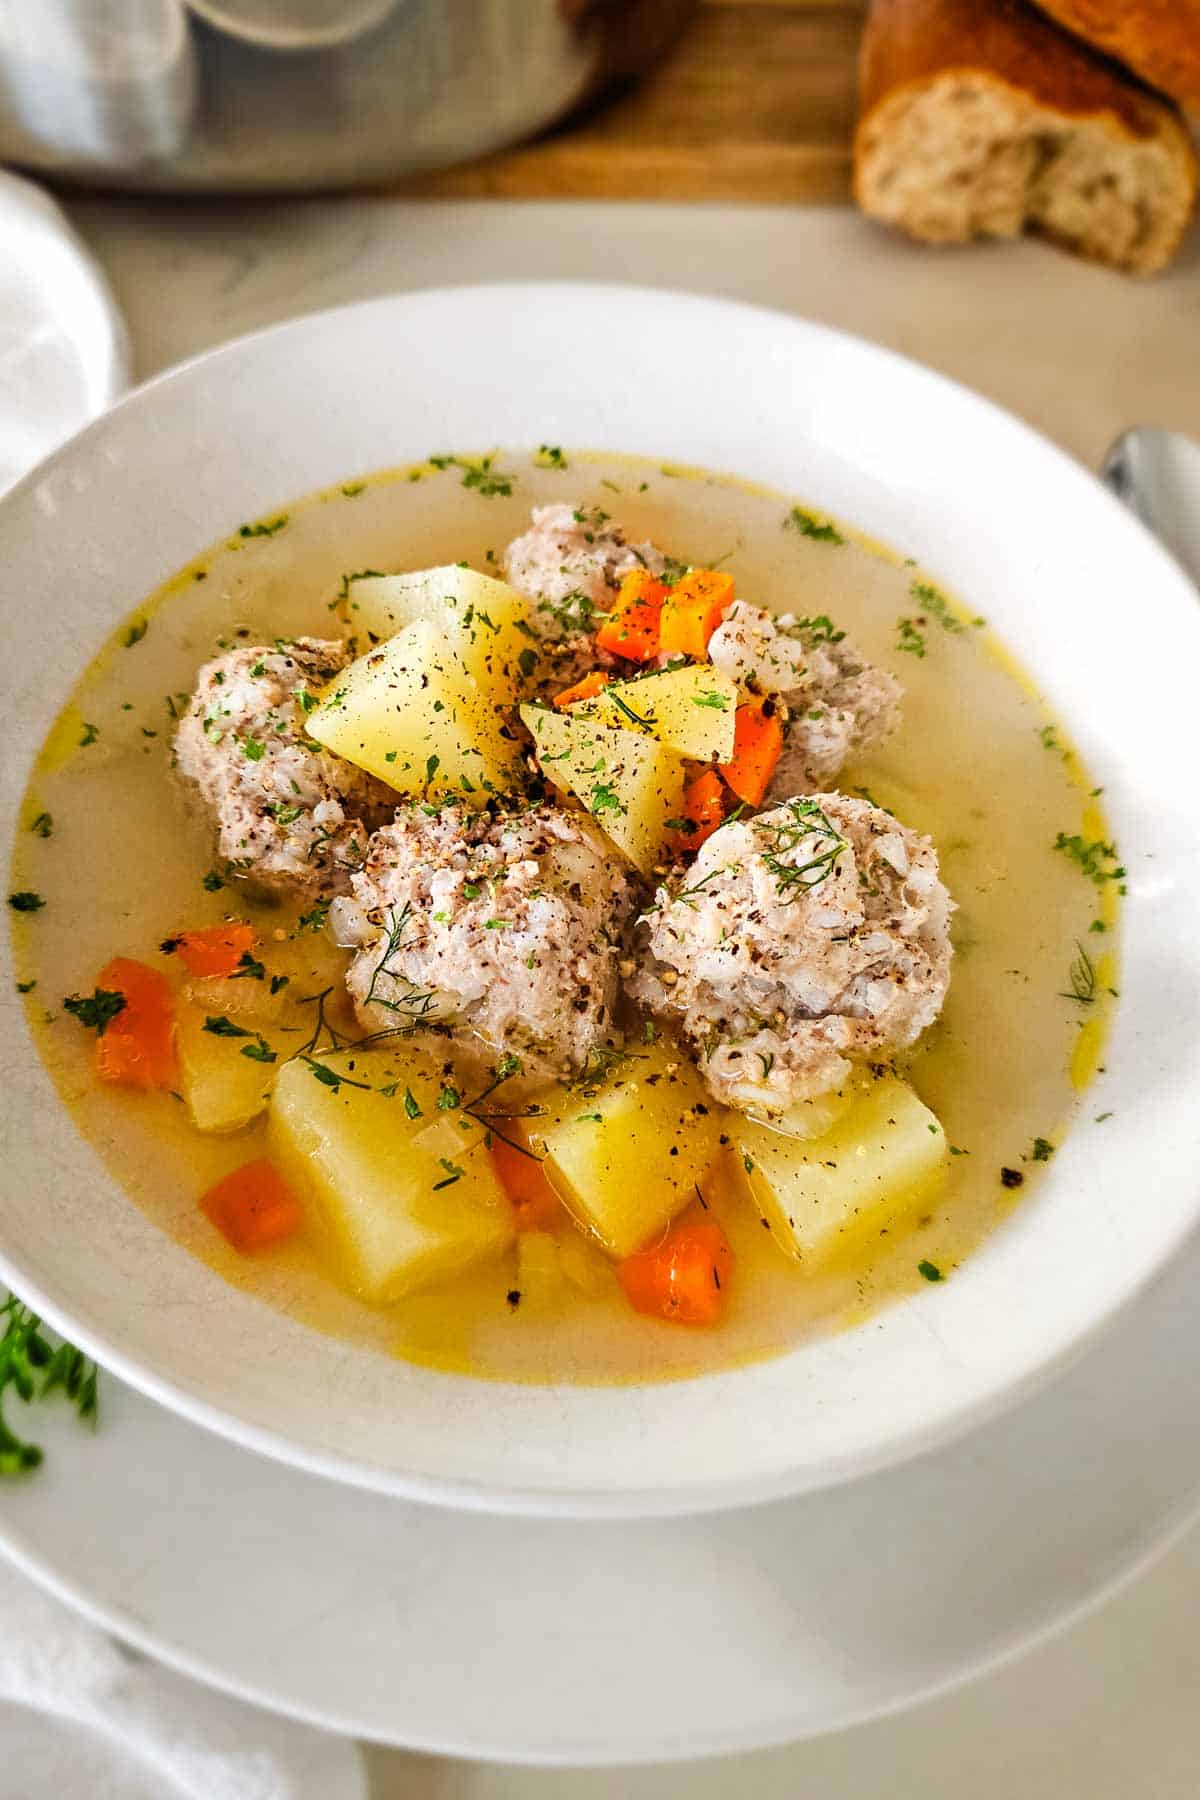 porcupine soup with chicken, potatoes, and carrots in white bowl.